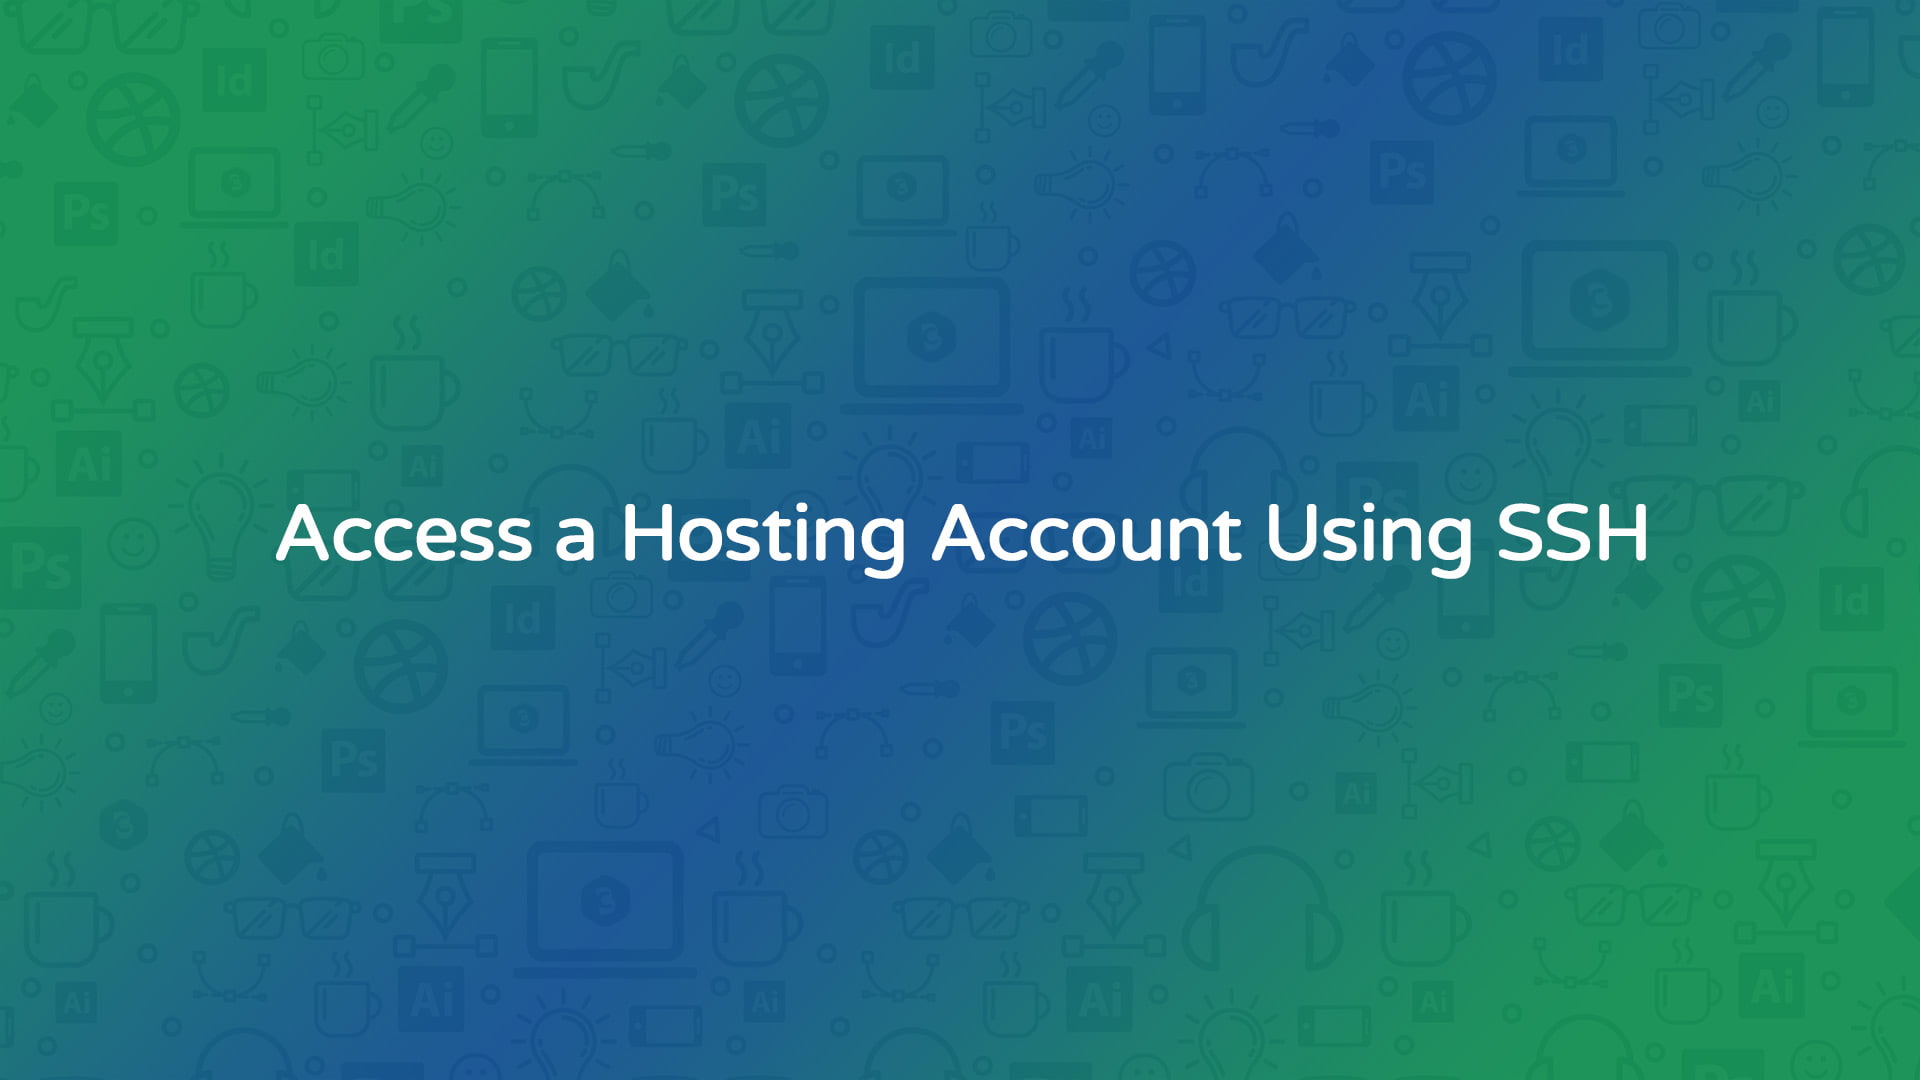 Access a Hosting Account Using SSH